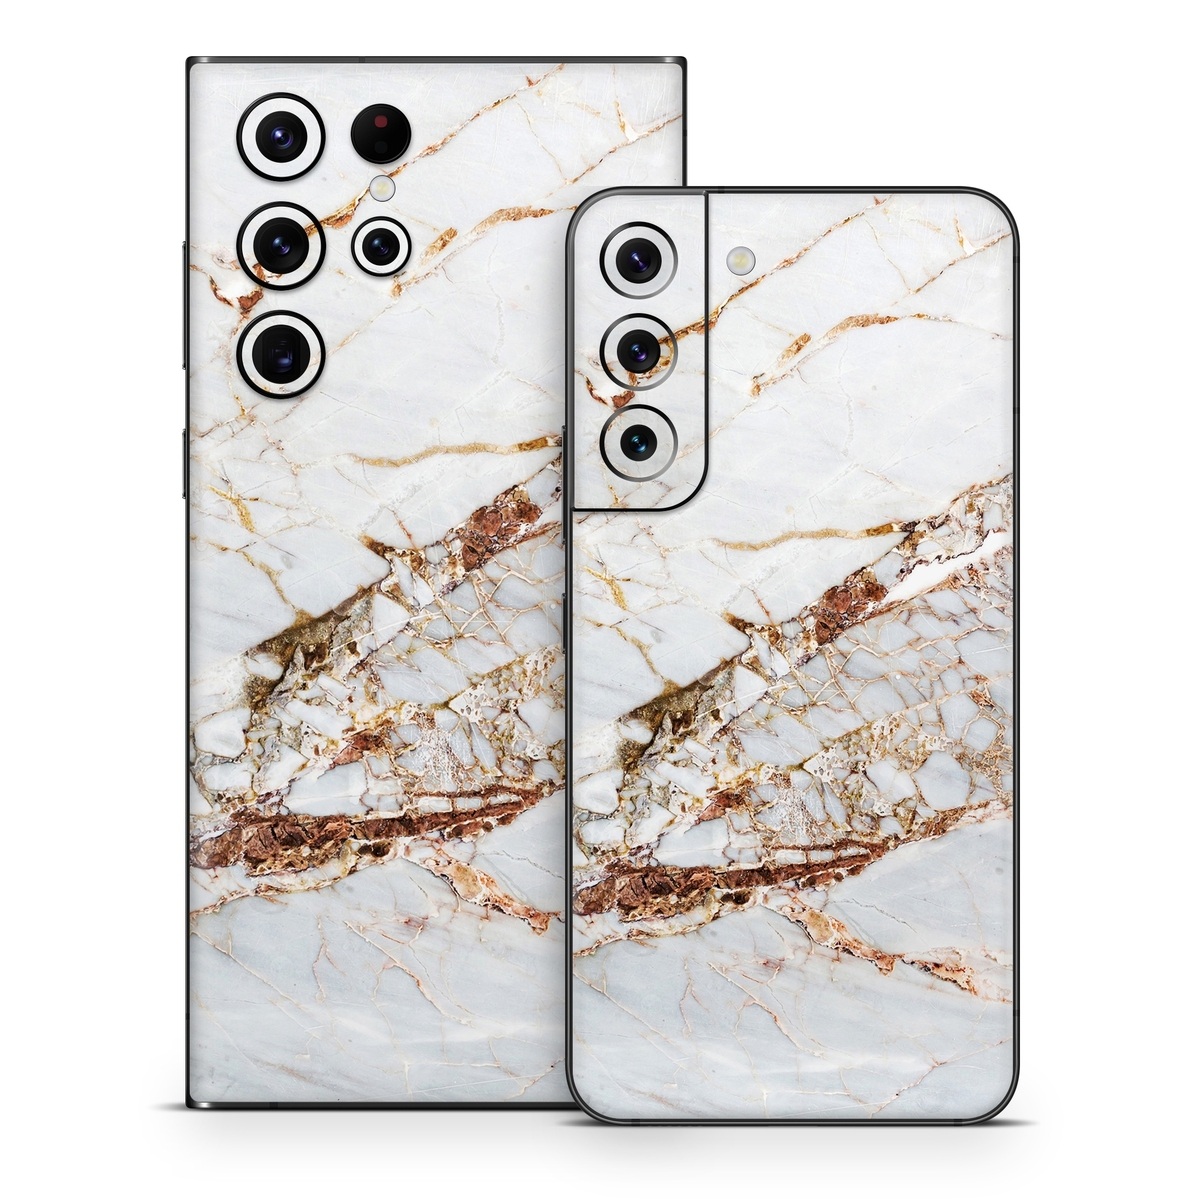 Samsung Galaxy S22 Series Skin design of White, Branch, Twig, Beige, Marble, Plant, Tile, with white, gray, yellow colors